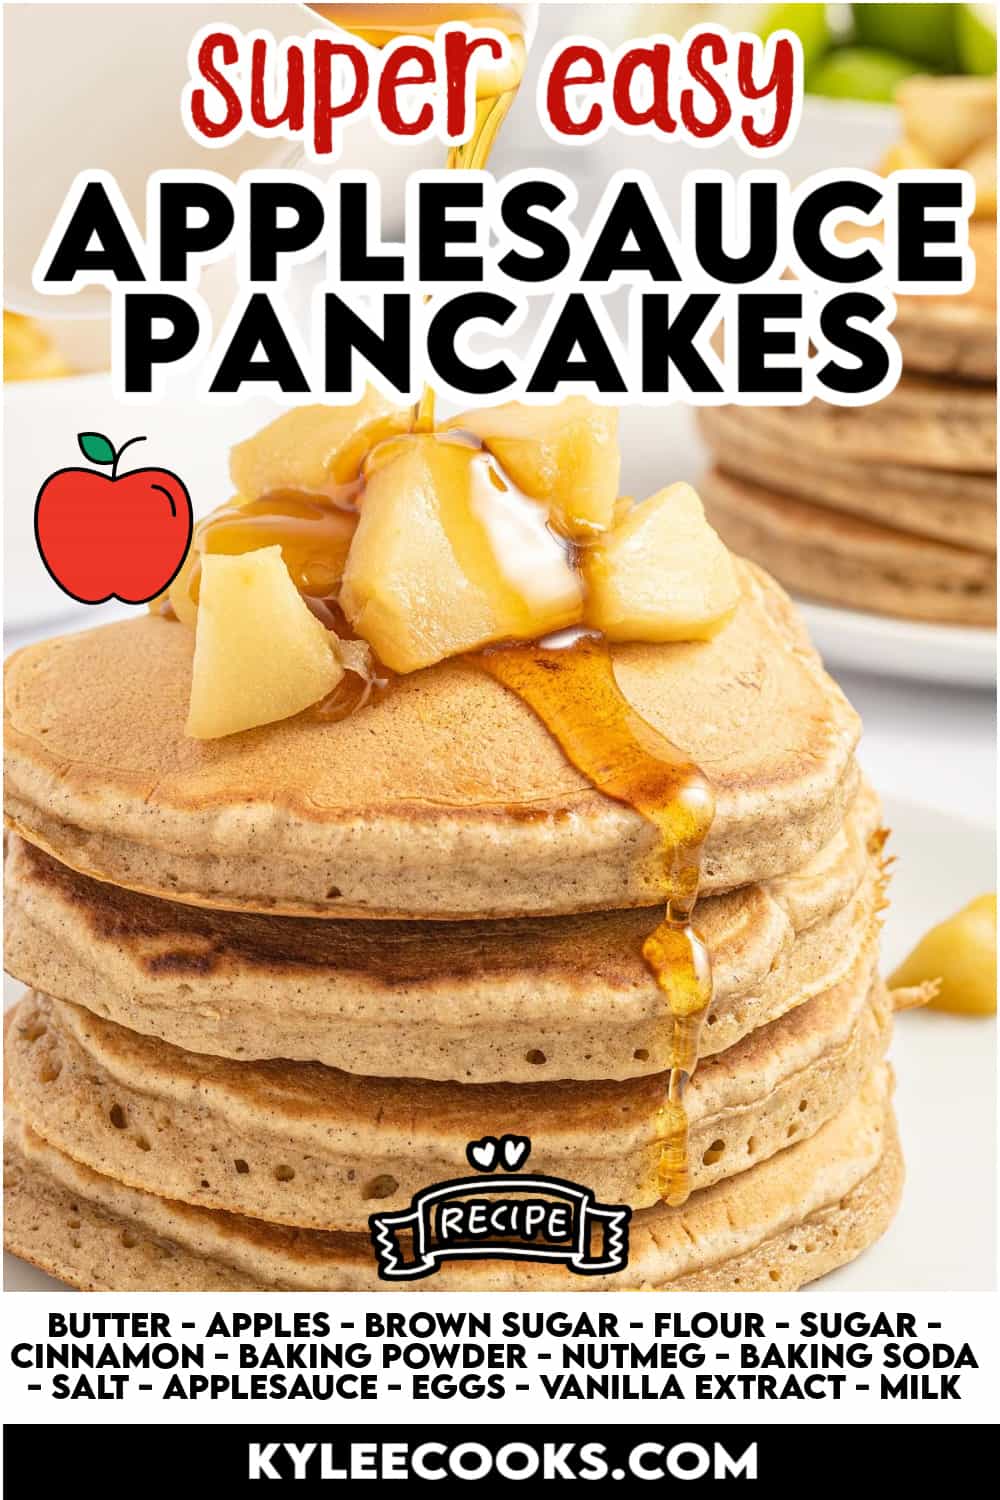 stack of applesauce pancakes with apples and syrup poured over the top.